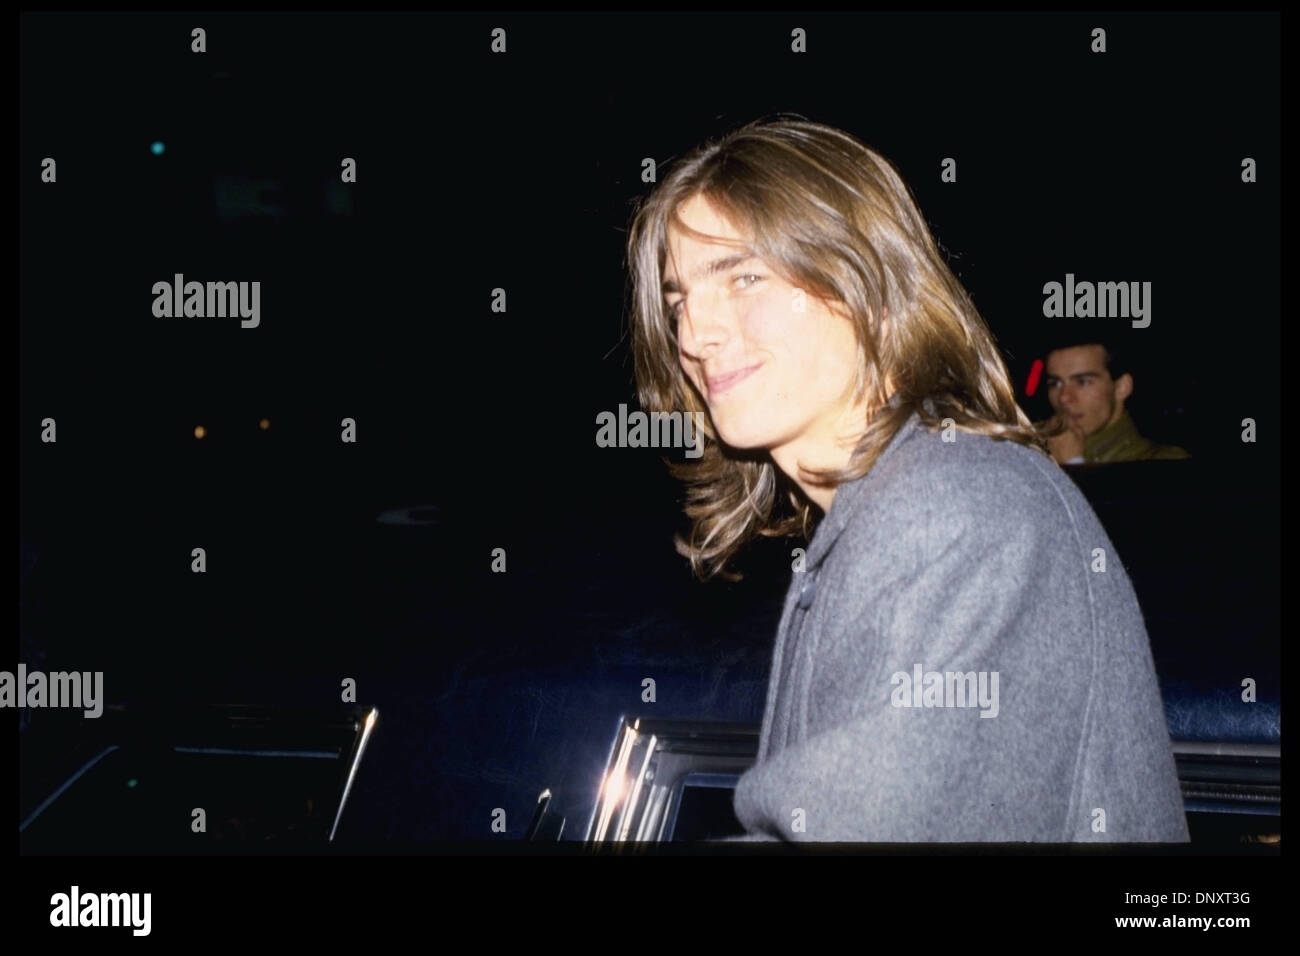 Hollywood, CA, USA; TOM CRUISE is shown with long hair in an undated photo.  Mandatory Credit: Kathy Hutchins/ZUMA Press. (©) Kathy Hutchins Stock Photo  - Alamy